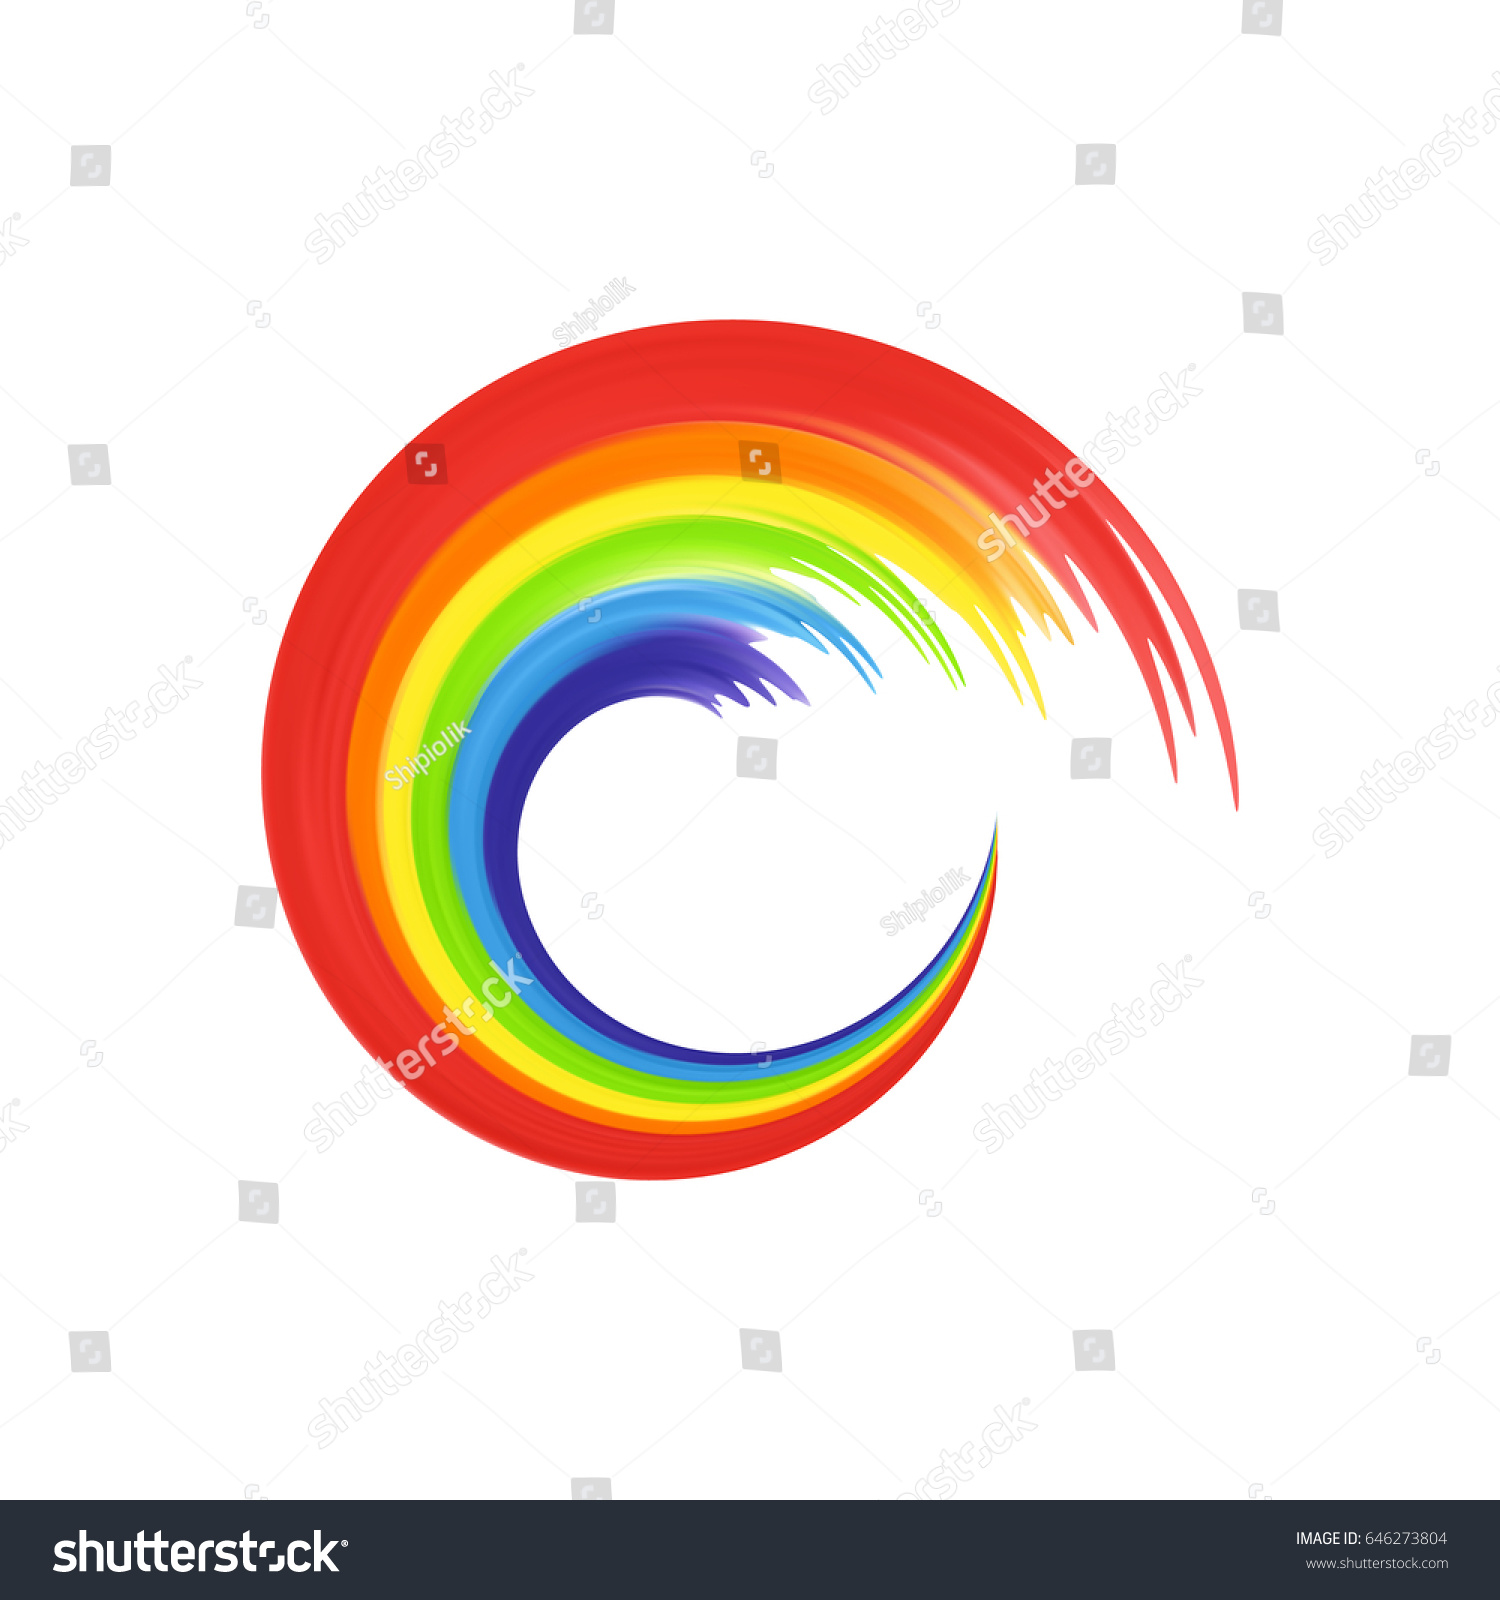 Rainbow Abstract Shape Your Design Banners Stock Vector 646273804 ...